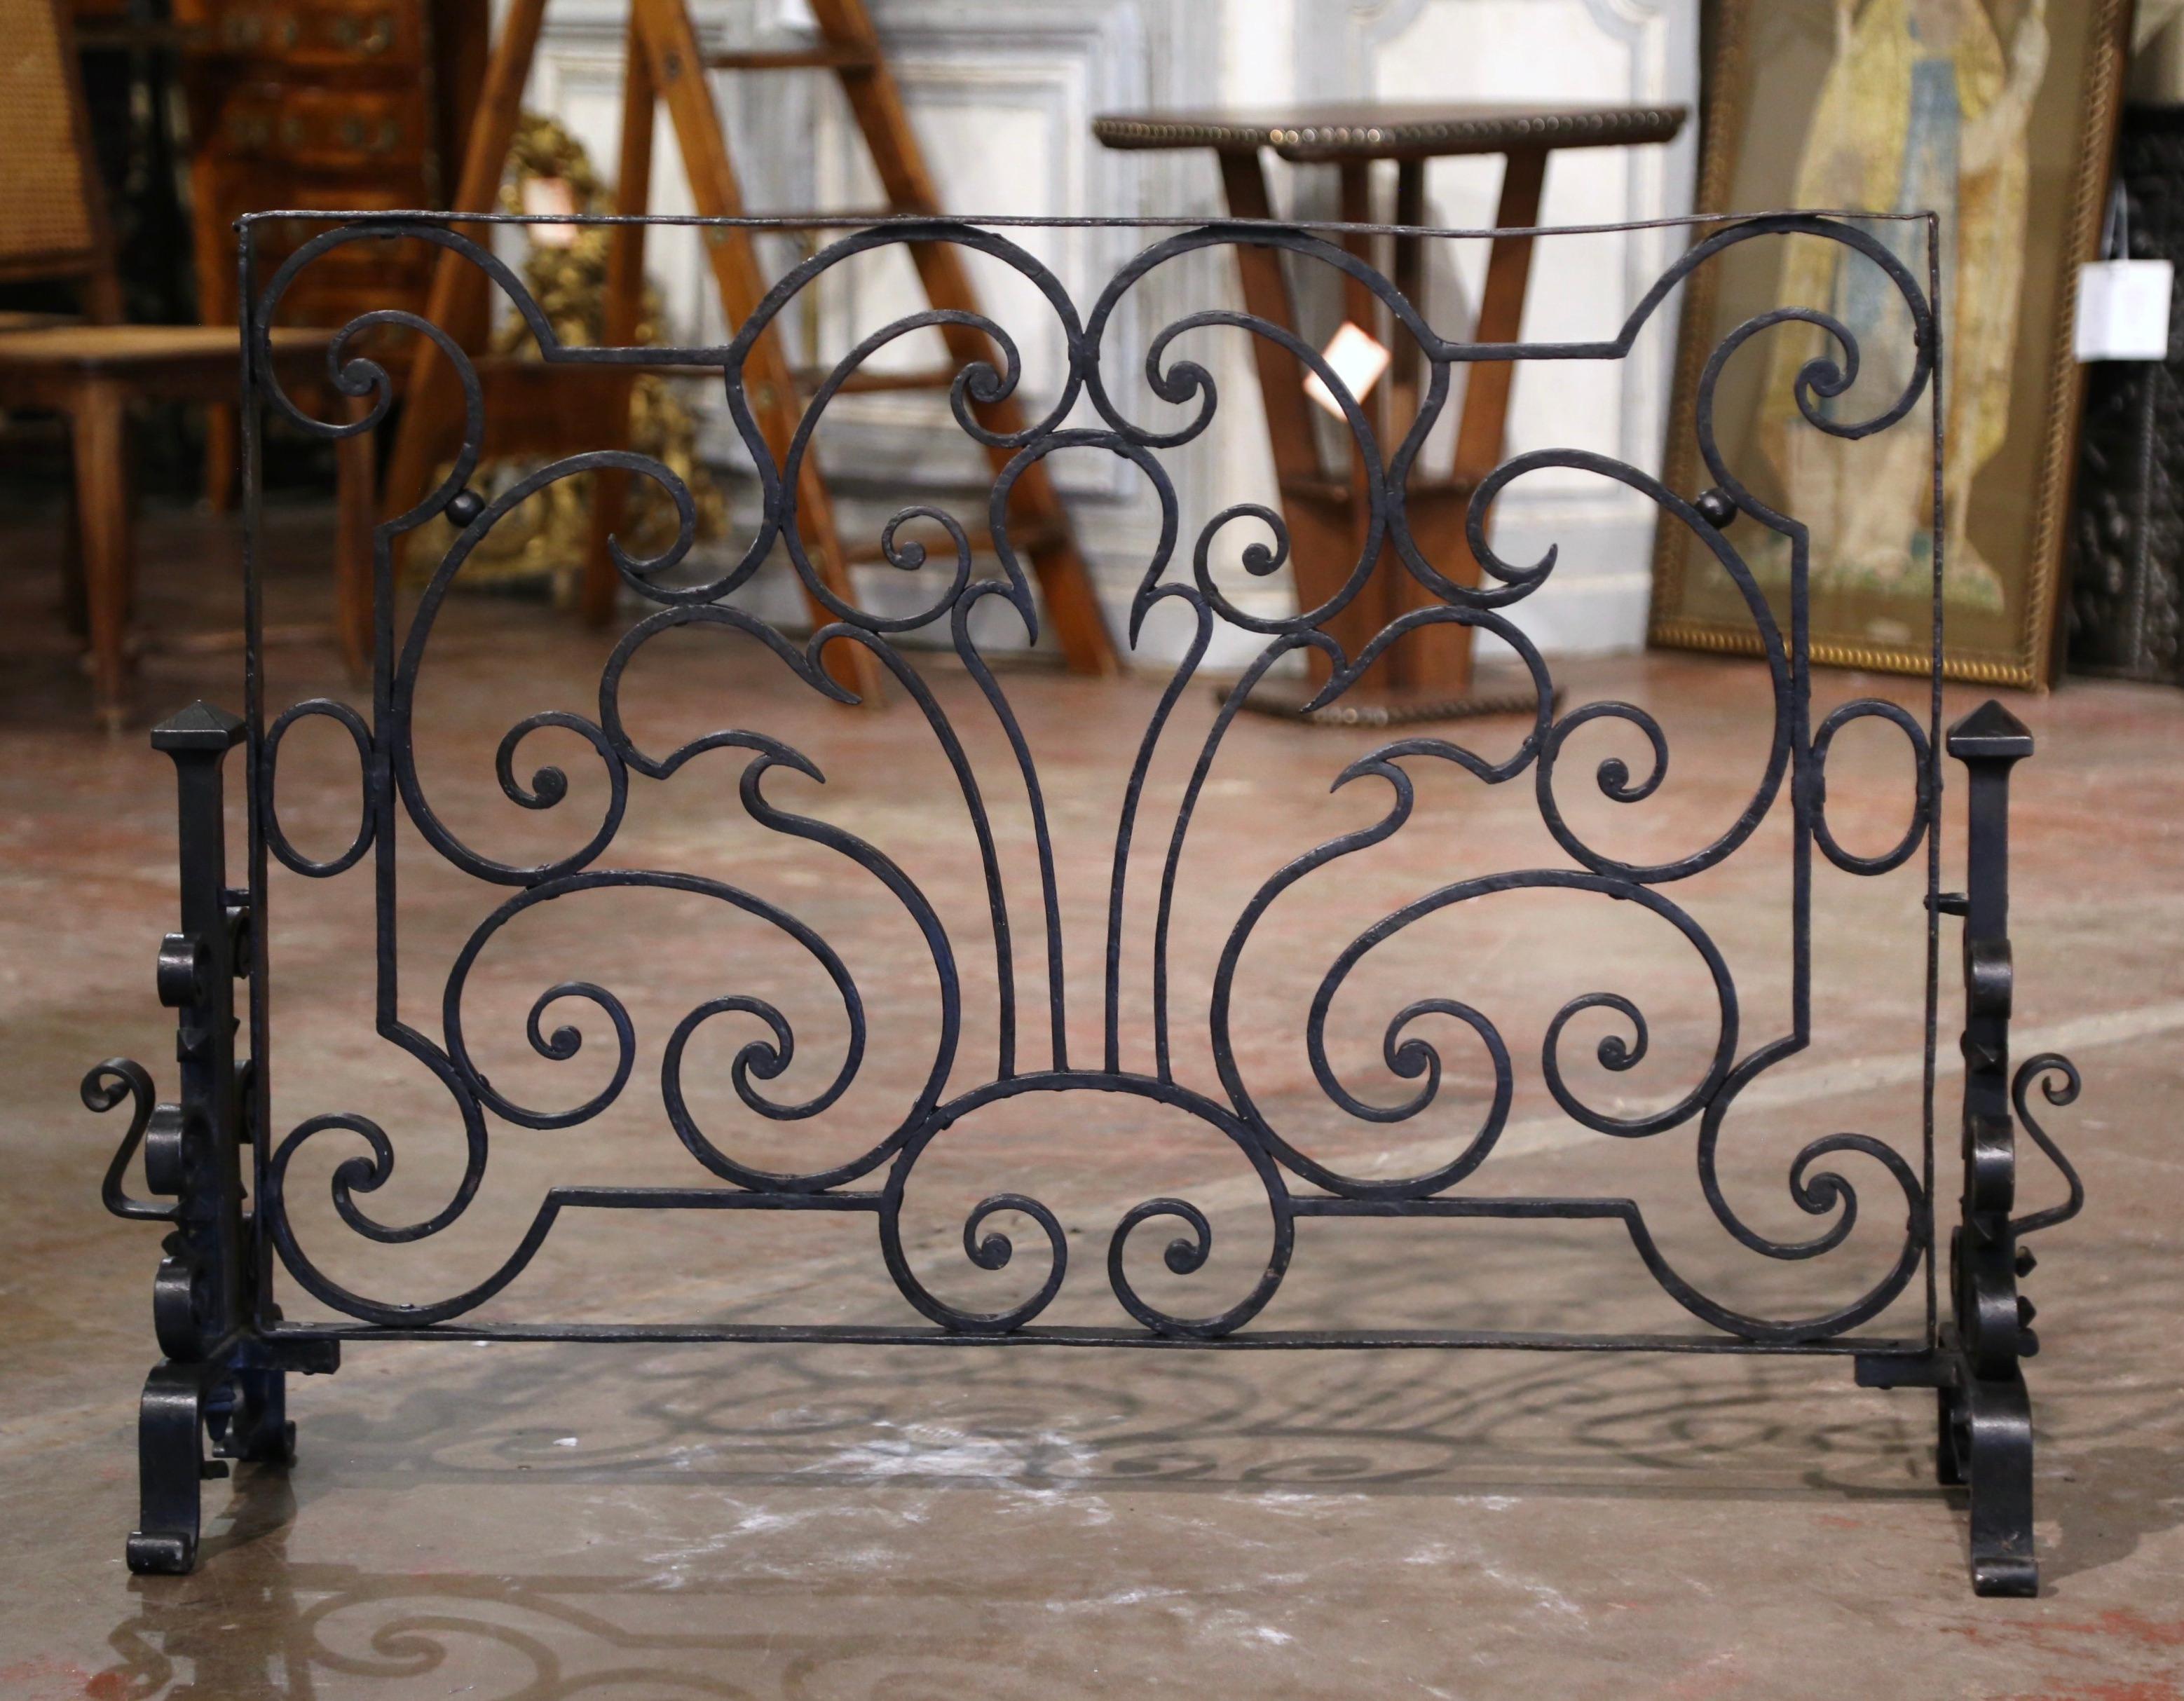 Forged Mid-19th Century French Patinated Wrought Iron Fireplace Screen